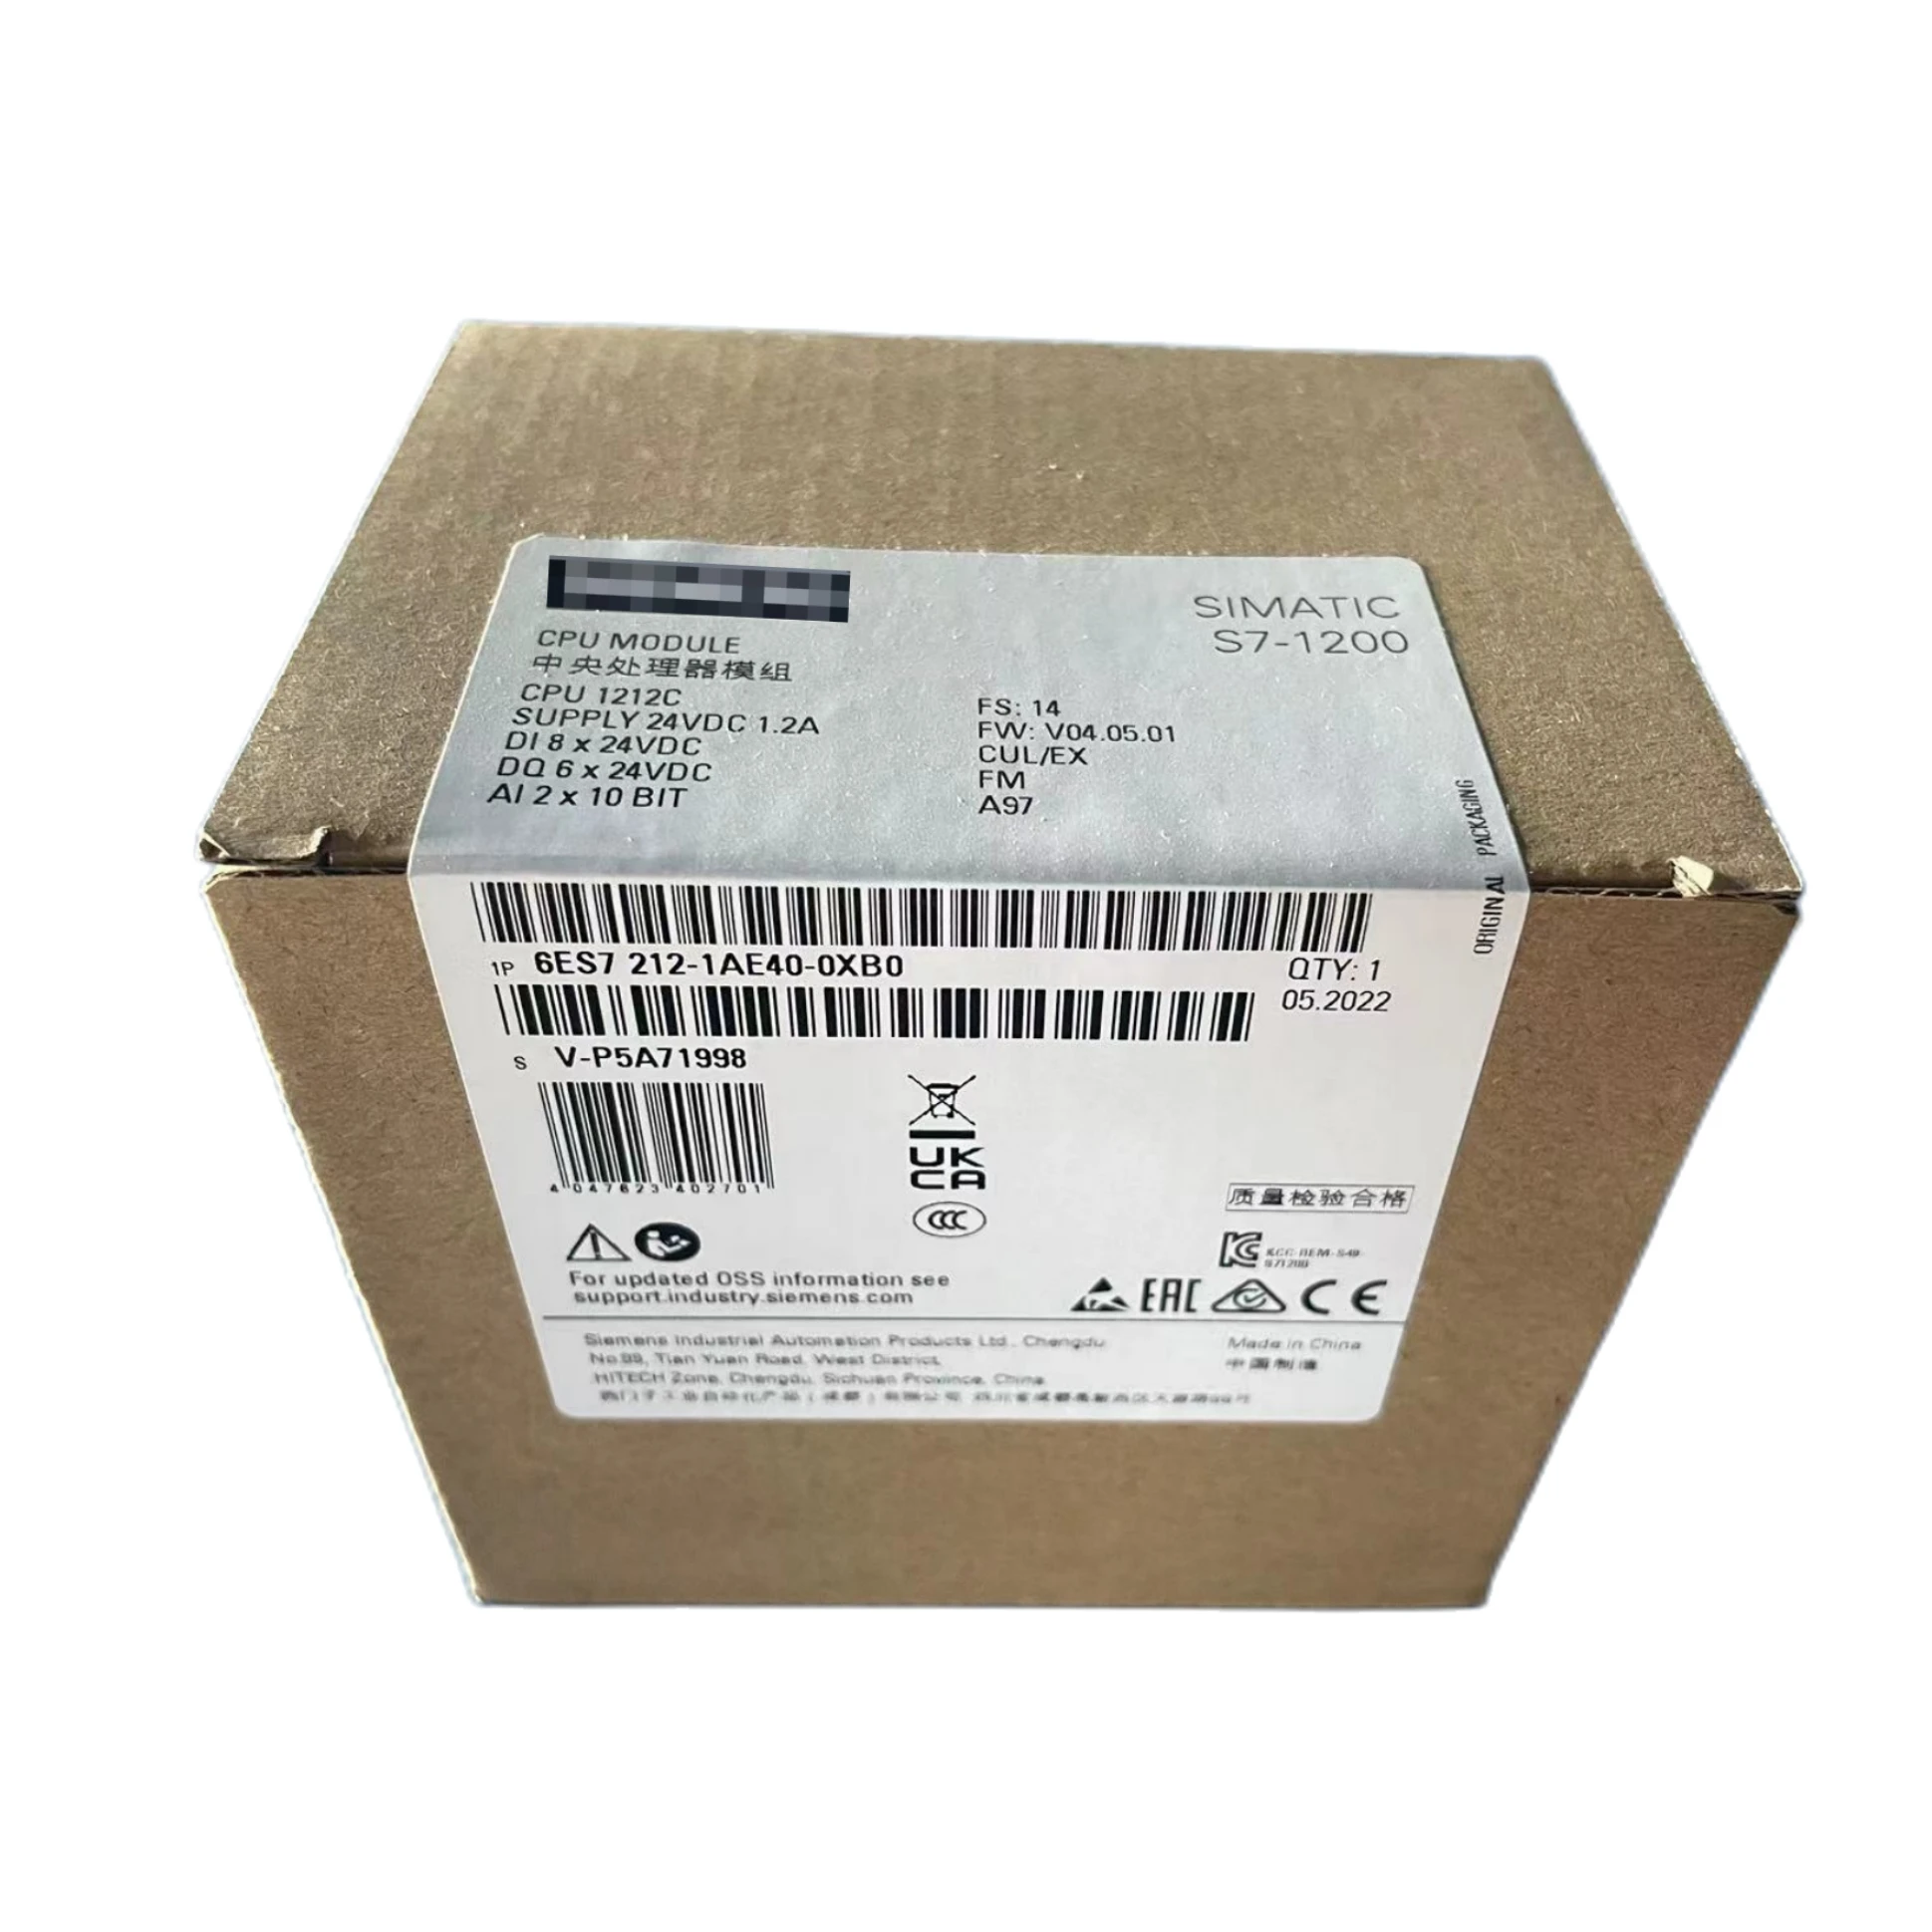 

Simatic S-7-1200 S71200 S7-1200 1212C DC/RLY 1200 1212 CPU programmable controller 6ES7212-1AE40-0XB0